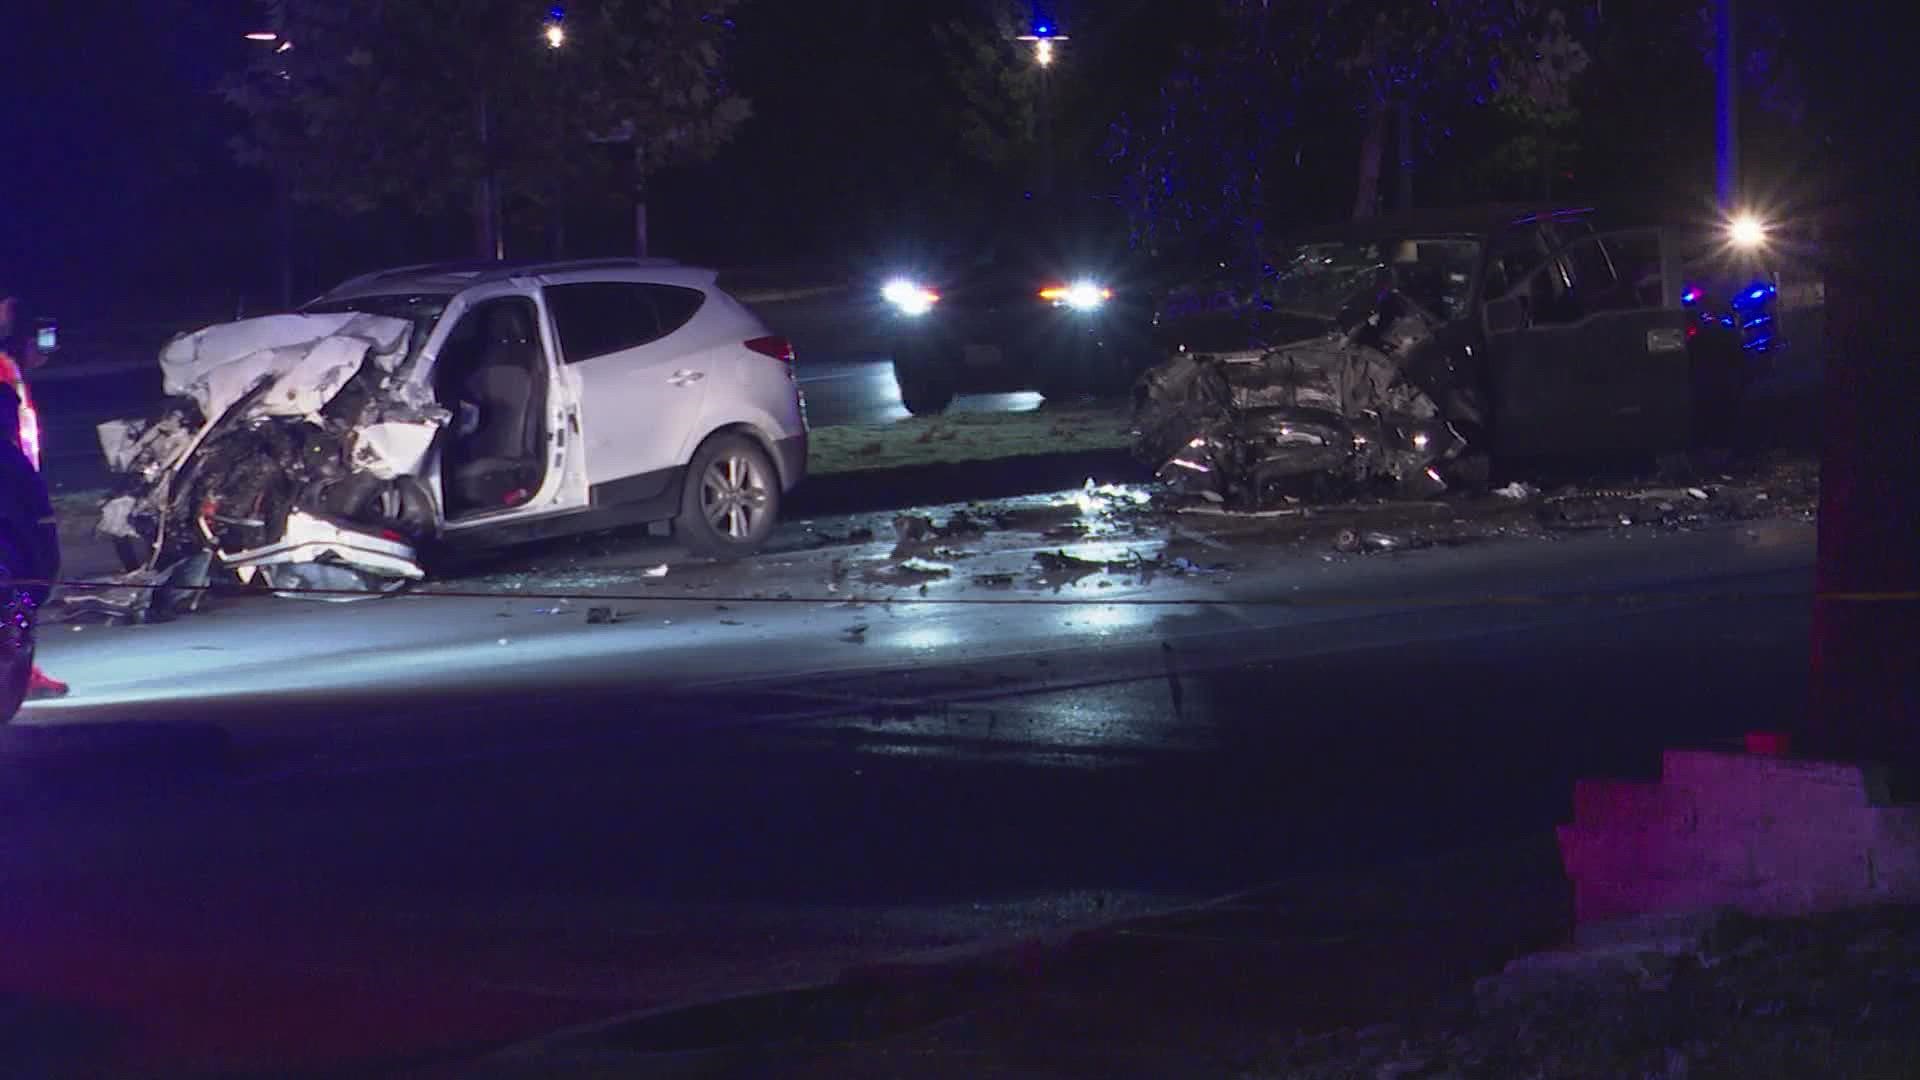 A witness said one of the vehicles was going the wrong way on Allen Parkway before the crash.